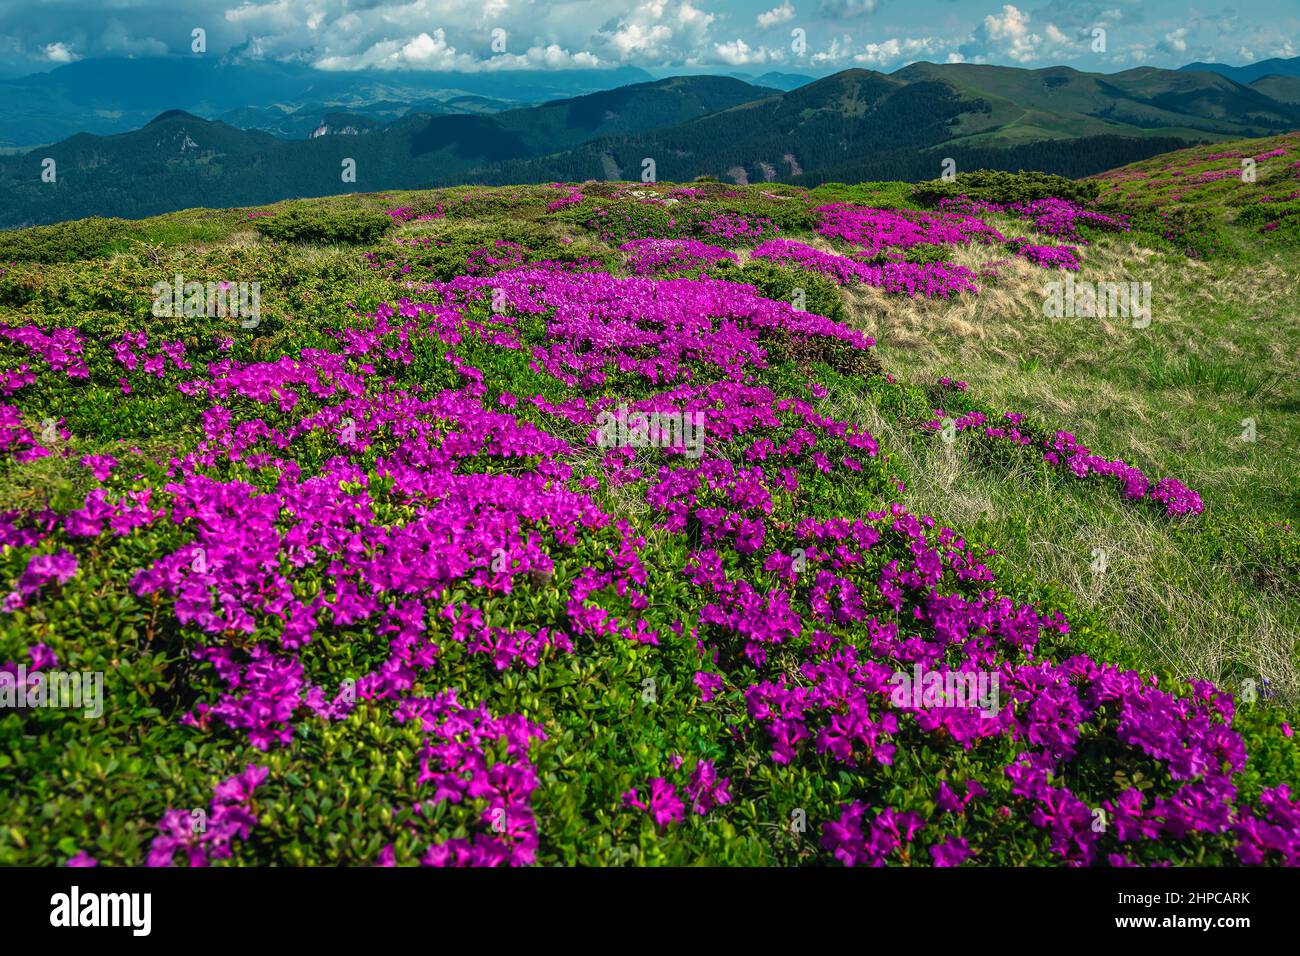 Stunning summer nature landscape, flowered pink rhododendron fields on the hills in Leaota mountains, Carpathians, Transylvania, Romania, Europe Stock Photo